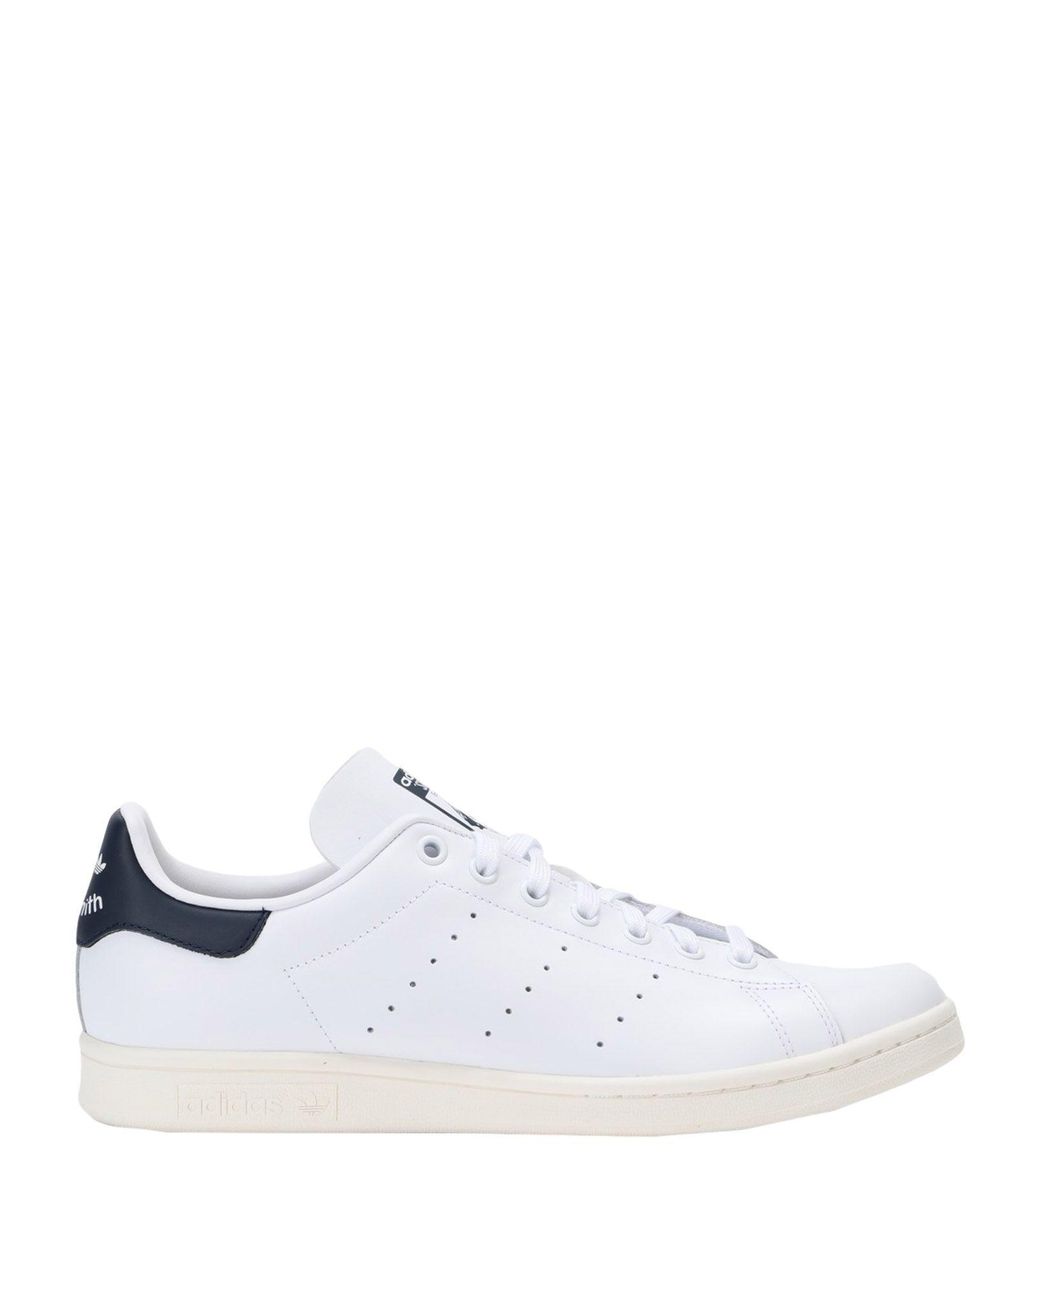 adidas Originals Low-tops & Sneakers in White for Men - Lyst